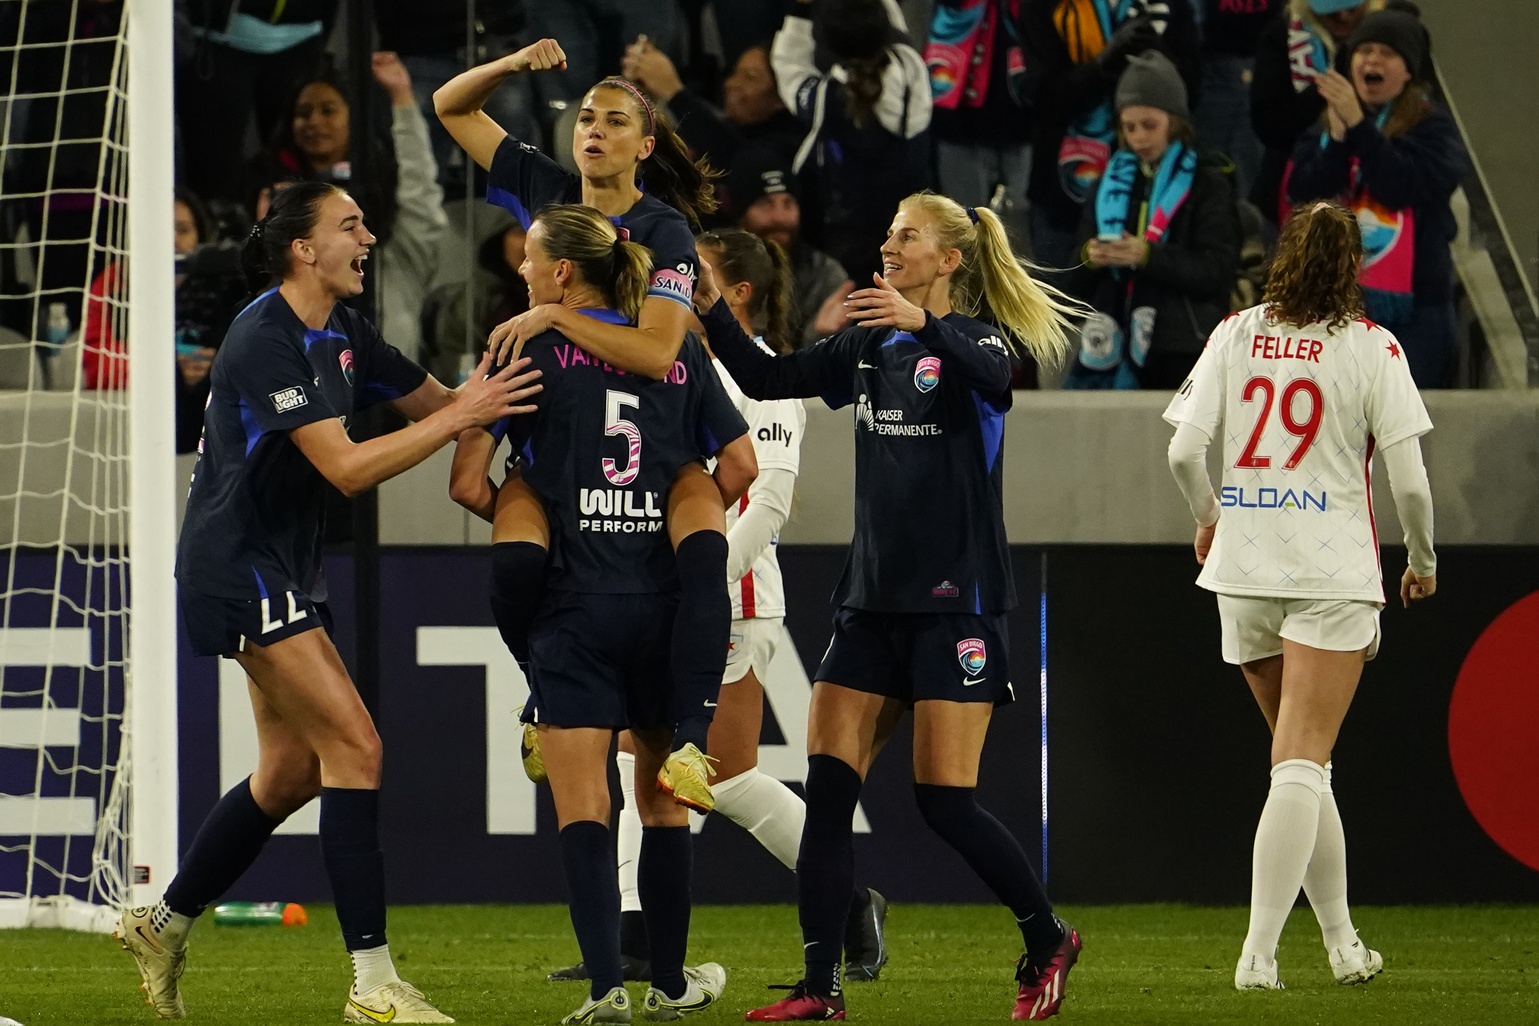 Nwsl: Chicago Red Stars at San Diego Wave FC as Alex Morgan Played a Role in the Wave Post Match Win